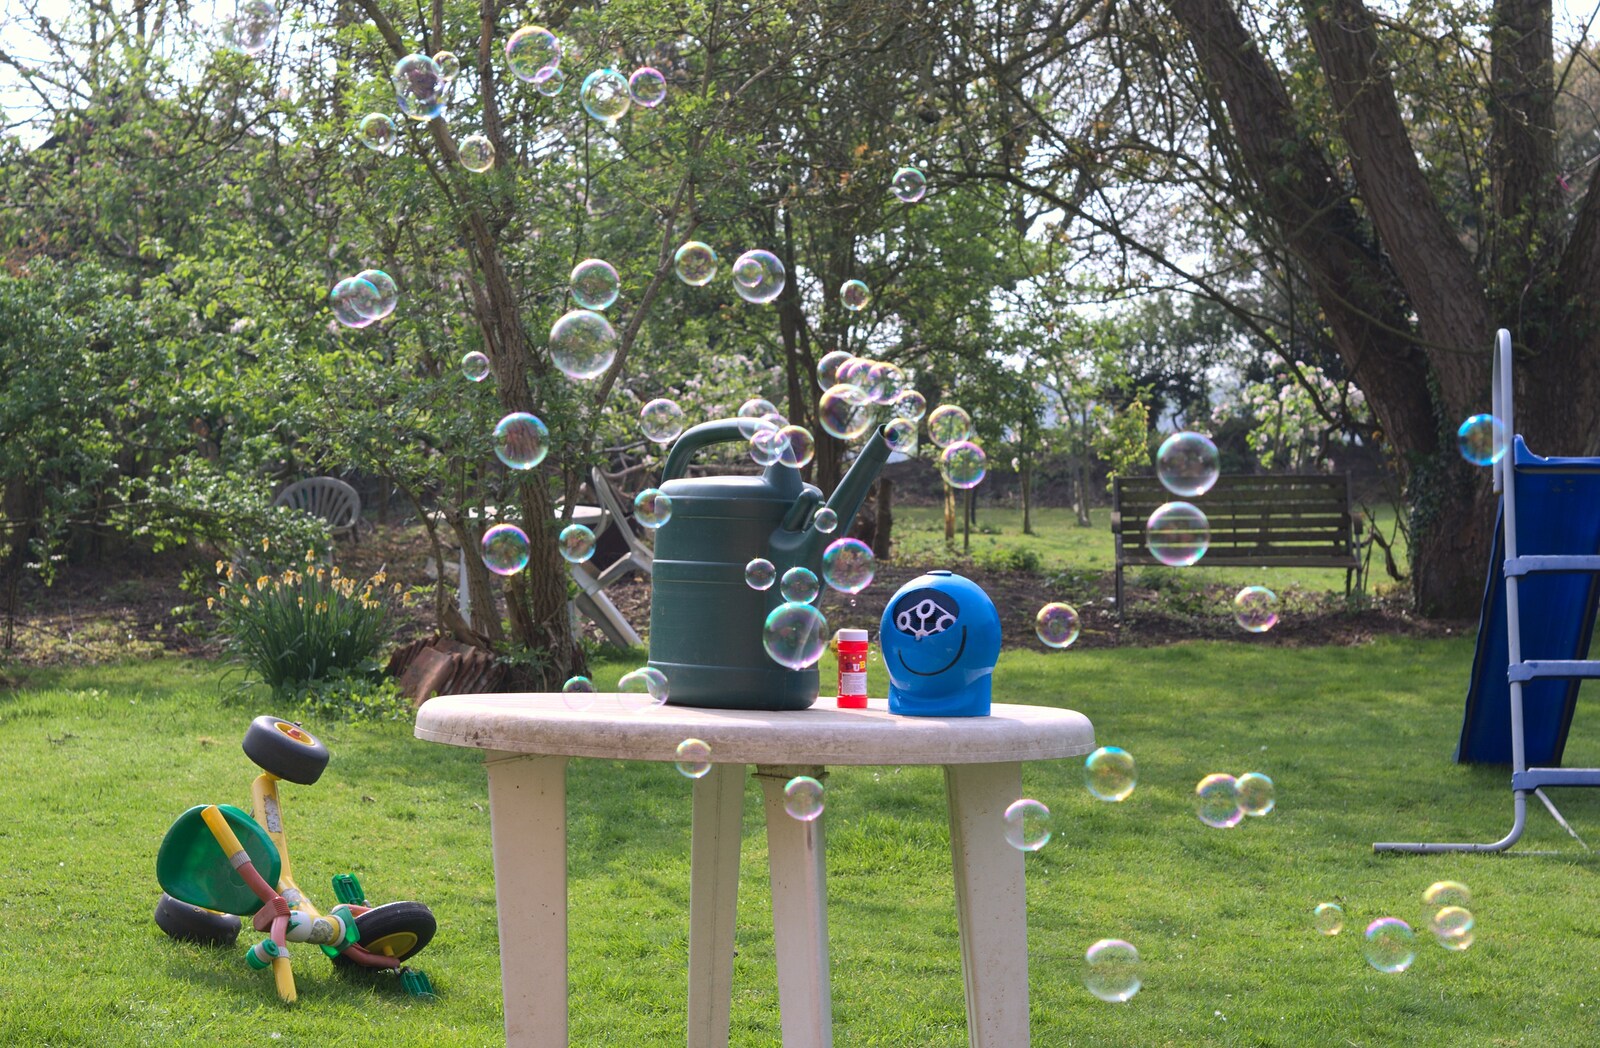 A bubble machine in action from Bubbles and Macro Fun, Brome, Suffolk - 17th April 2011